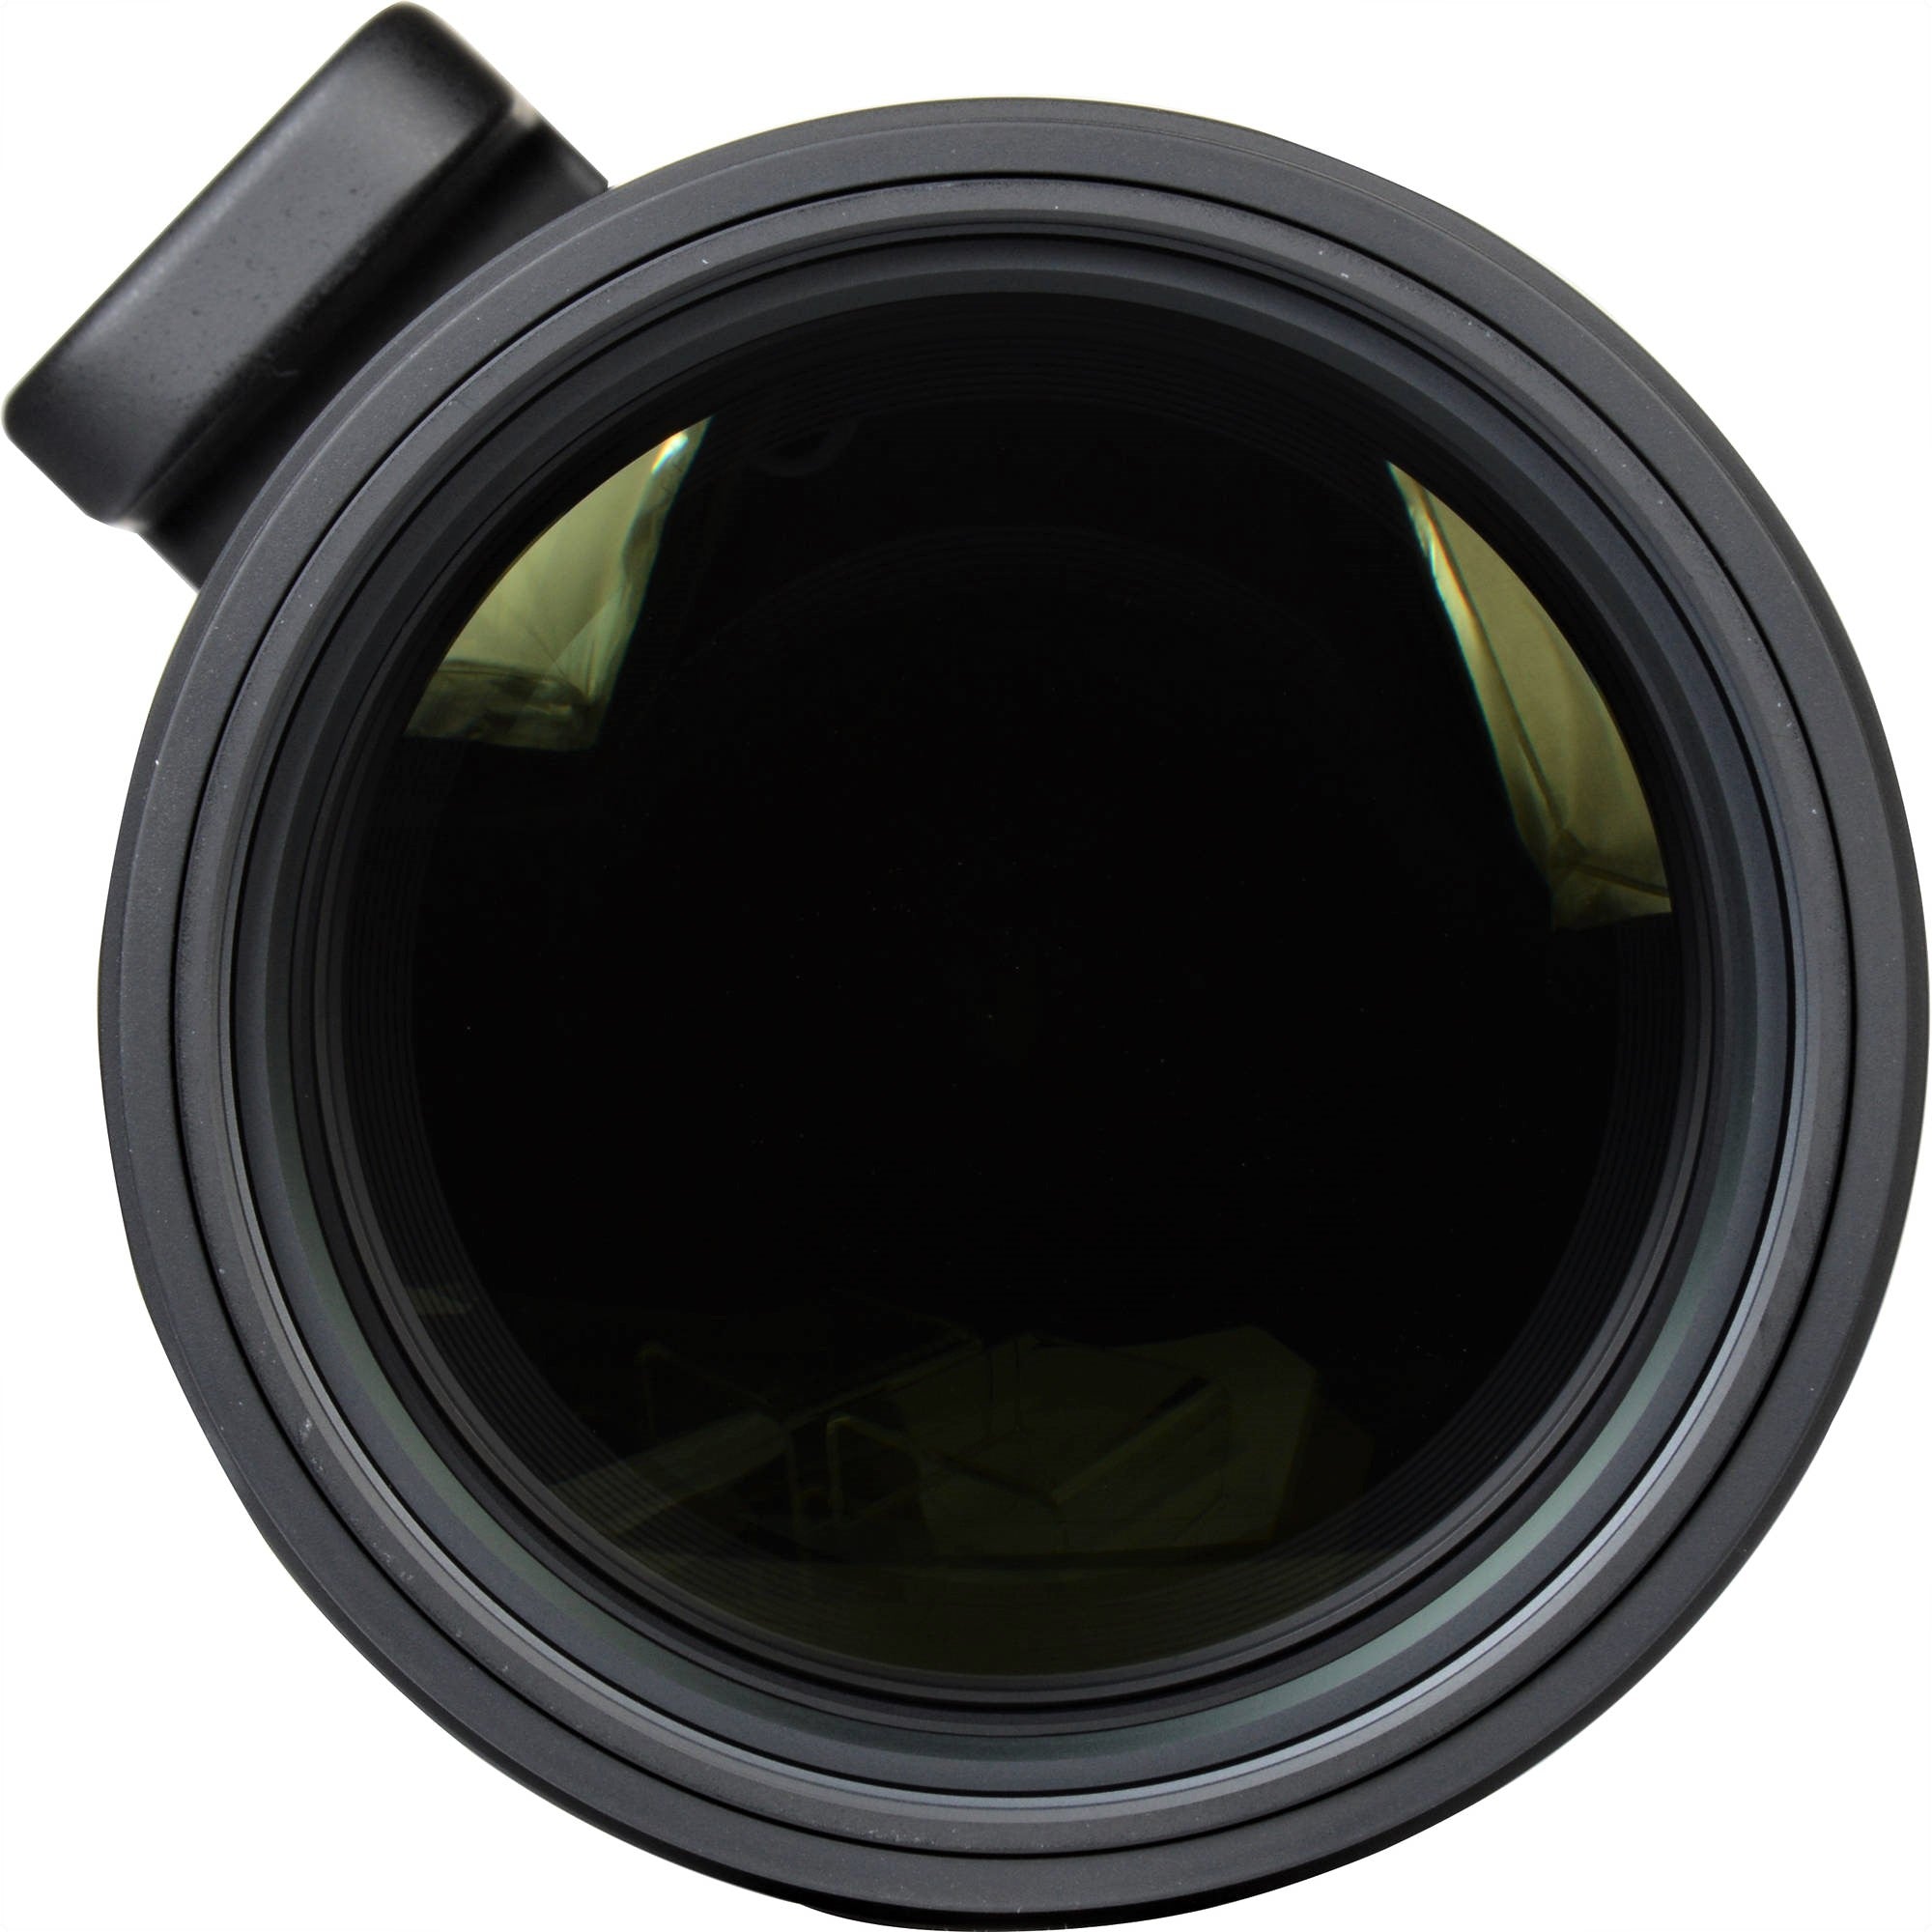 Sigma 150-600mm F5-6.3 DG OS HSM Sports Lens for Canon EF in a Front Close-Up View